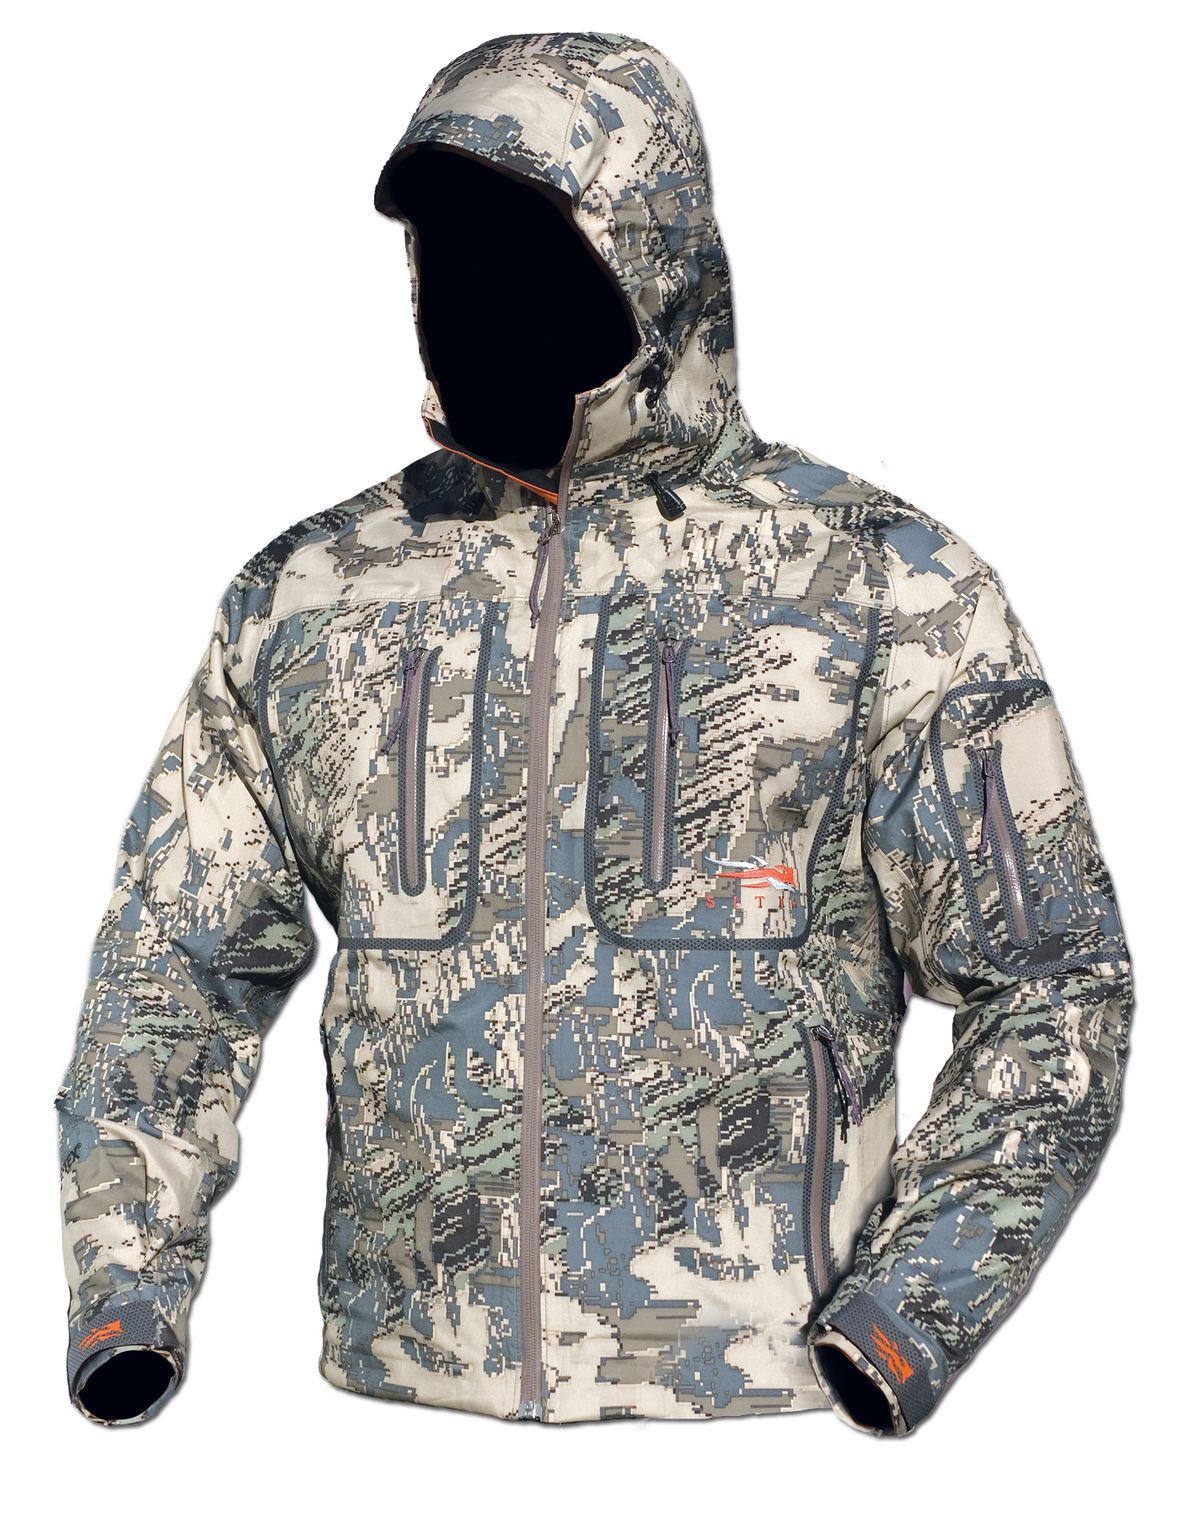 Sitka Stormfront Jacket with Gore Optifade Concealment and Gore-Tex fabric technology brings digital camouflage concepts to clothing.Courtesy of W.L. Gore and Associates (Courtesy of W.L. Gore and Associates / The Spokesman-Review)